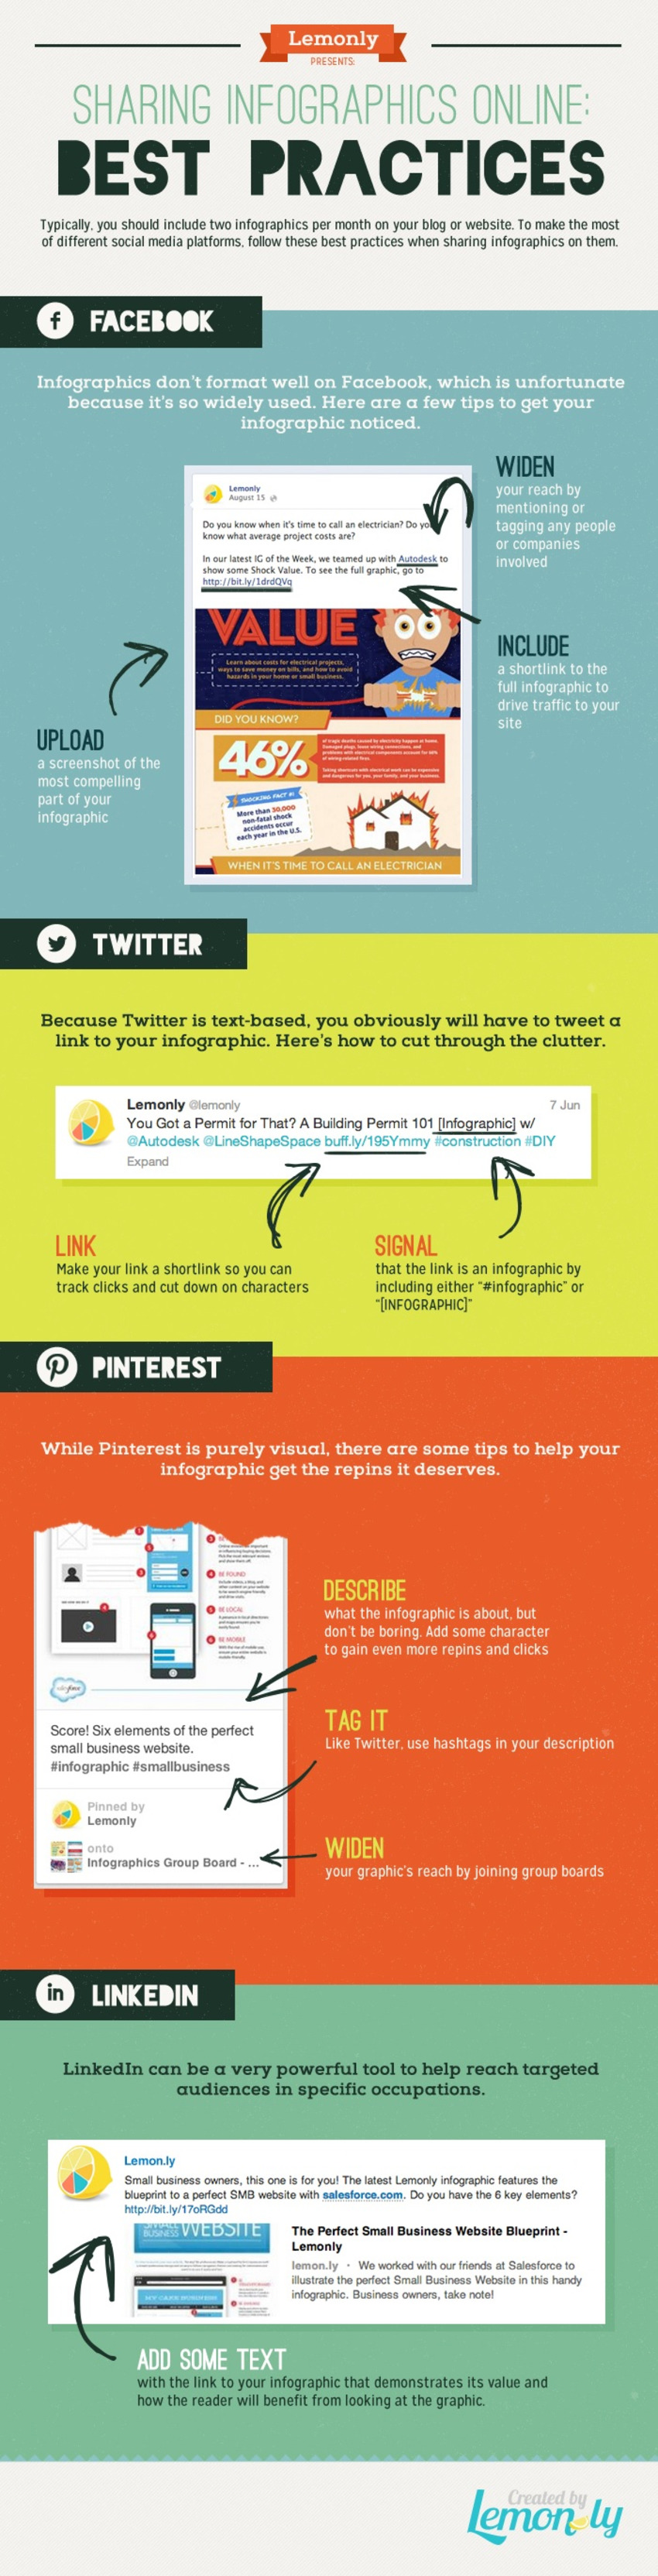 Tips for Sharing Your Infographic on Facebook, Twitter, Pinterest and Linkedin [Infographic] - Social Media Writing | The MarTech Digest | Scoop.it